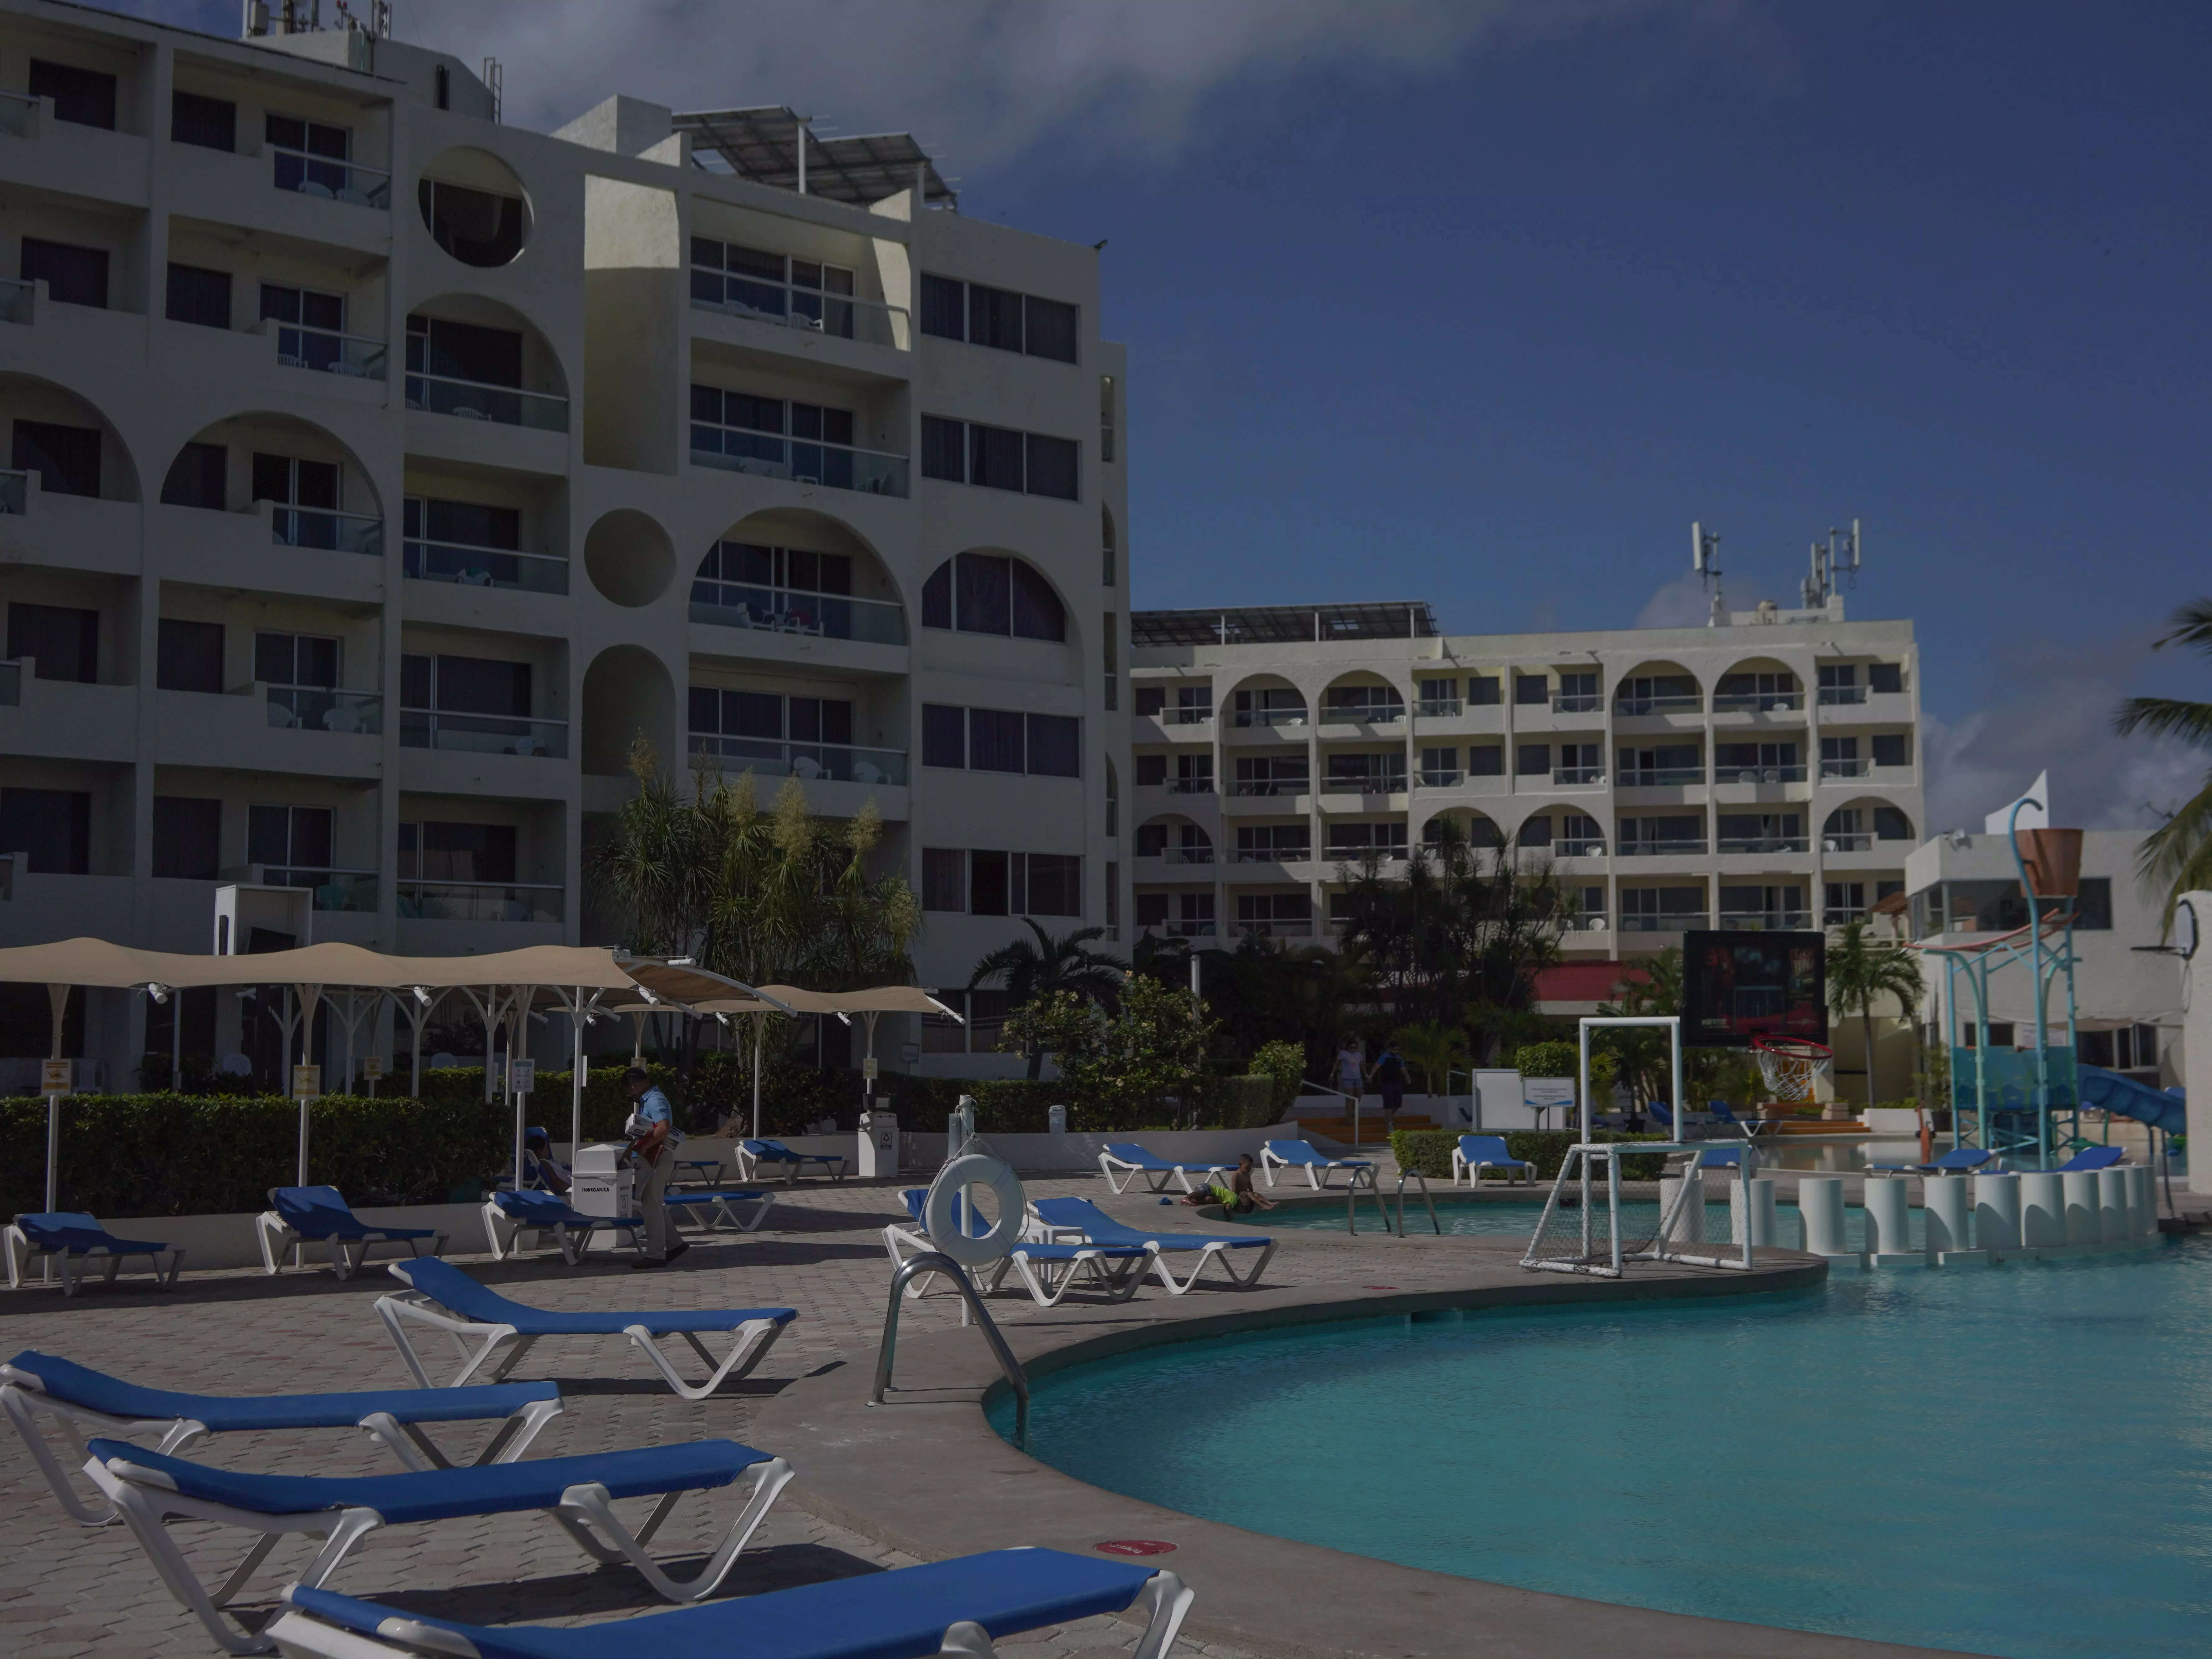 Aquamarina beach hotel; foldable chairs surround pool and resort in background